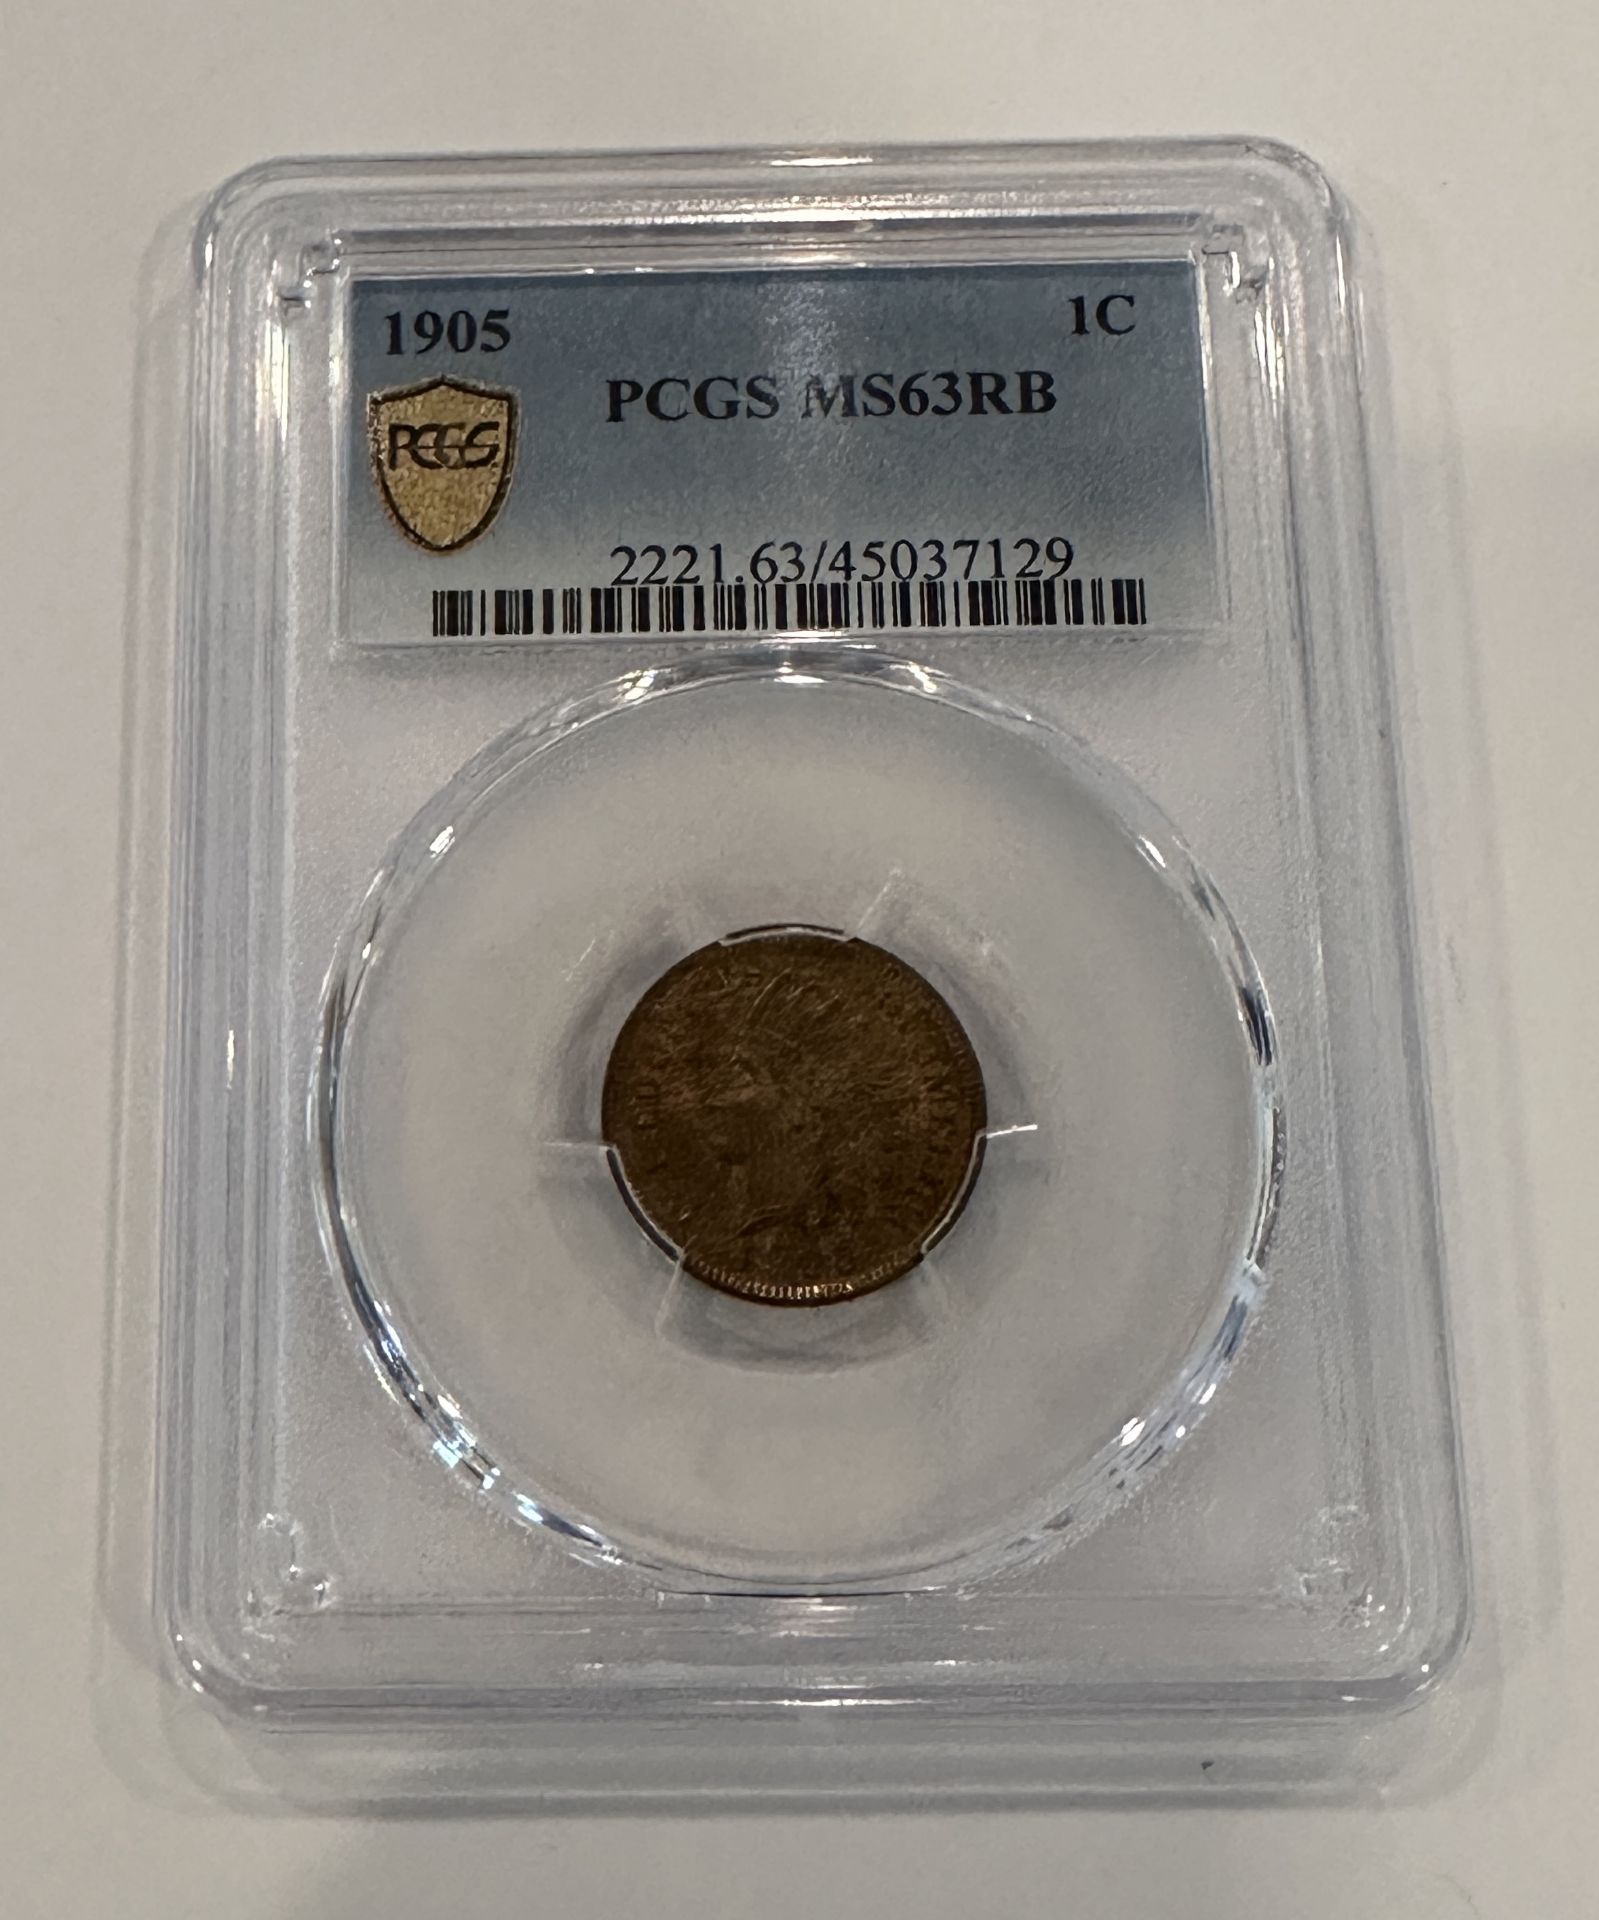 1905 PCGS MS63RB 1C GRADED COIN